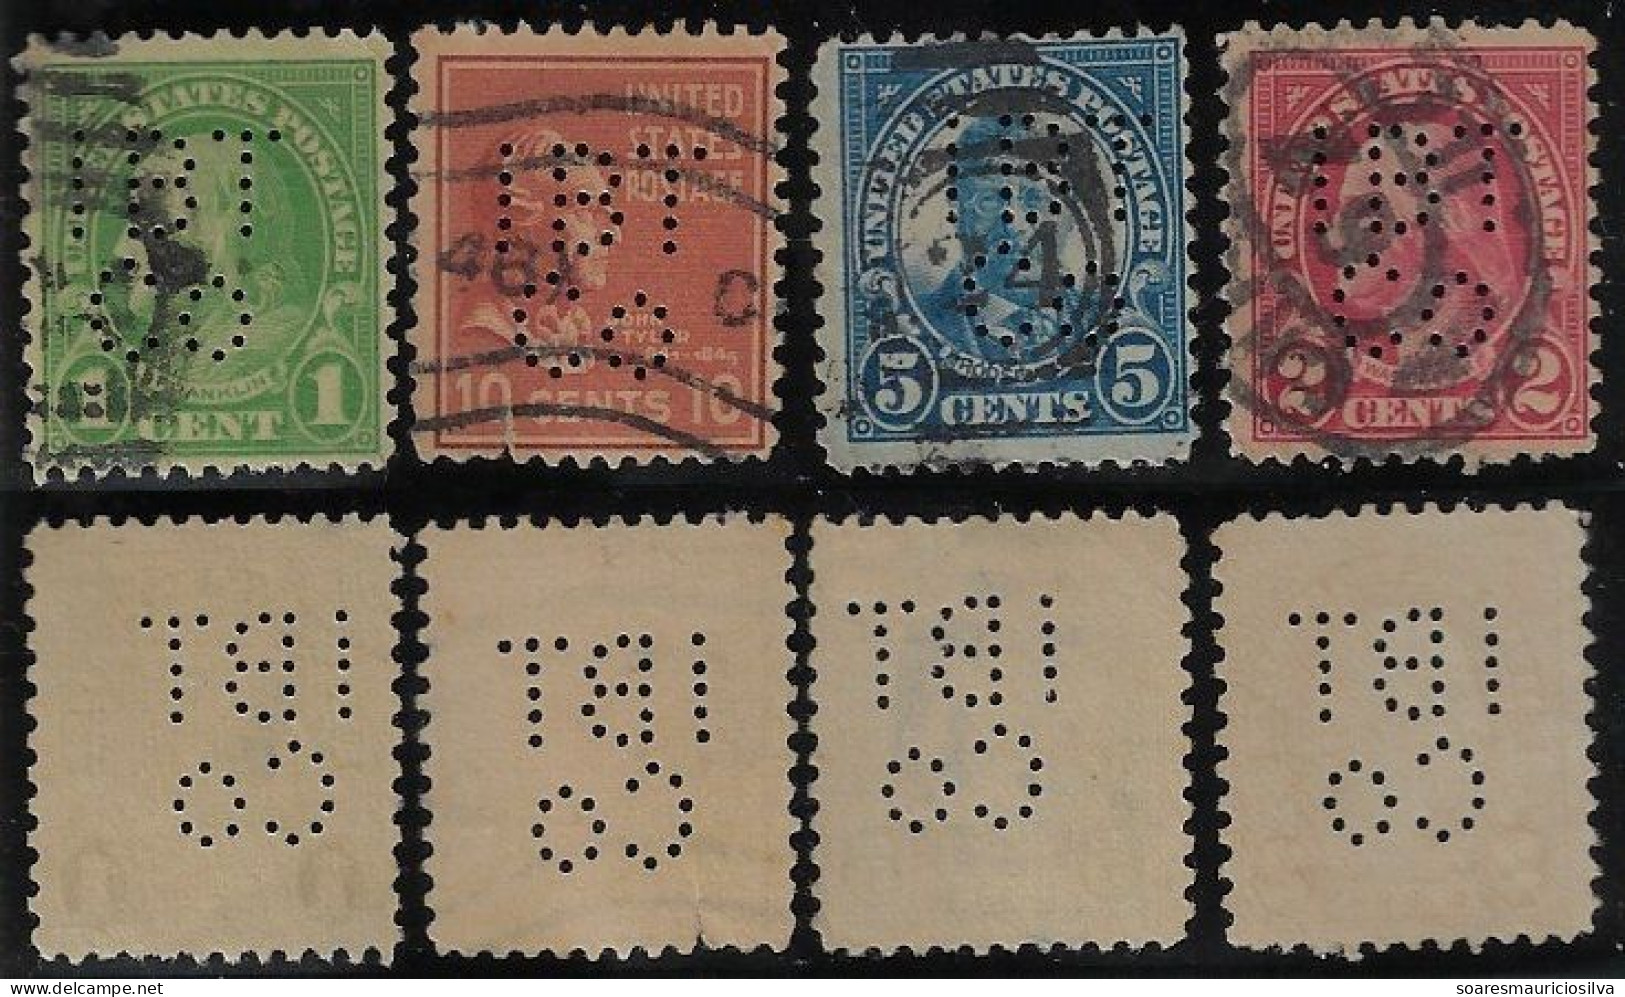 USA United States 1917/1960 4 Stamp Perfin IBT/Co By Illinois Bell Telephone Company From Chicago Lochung Perfore - Perforados